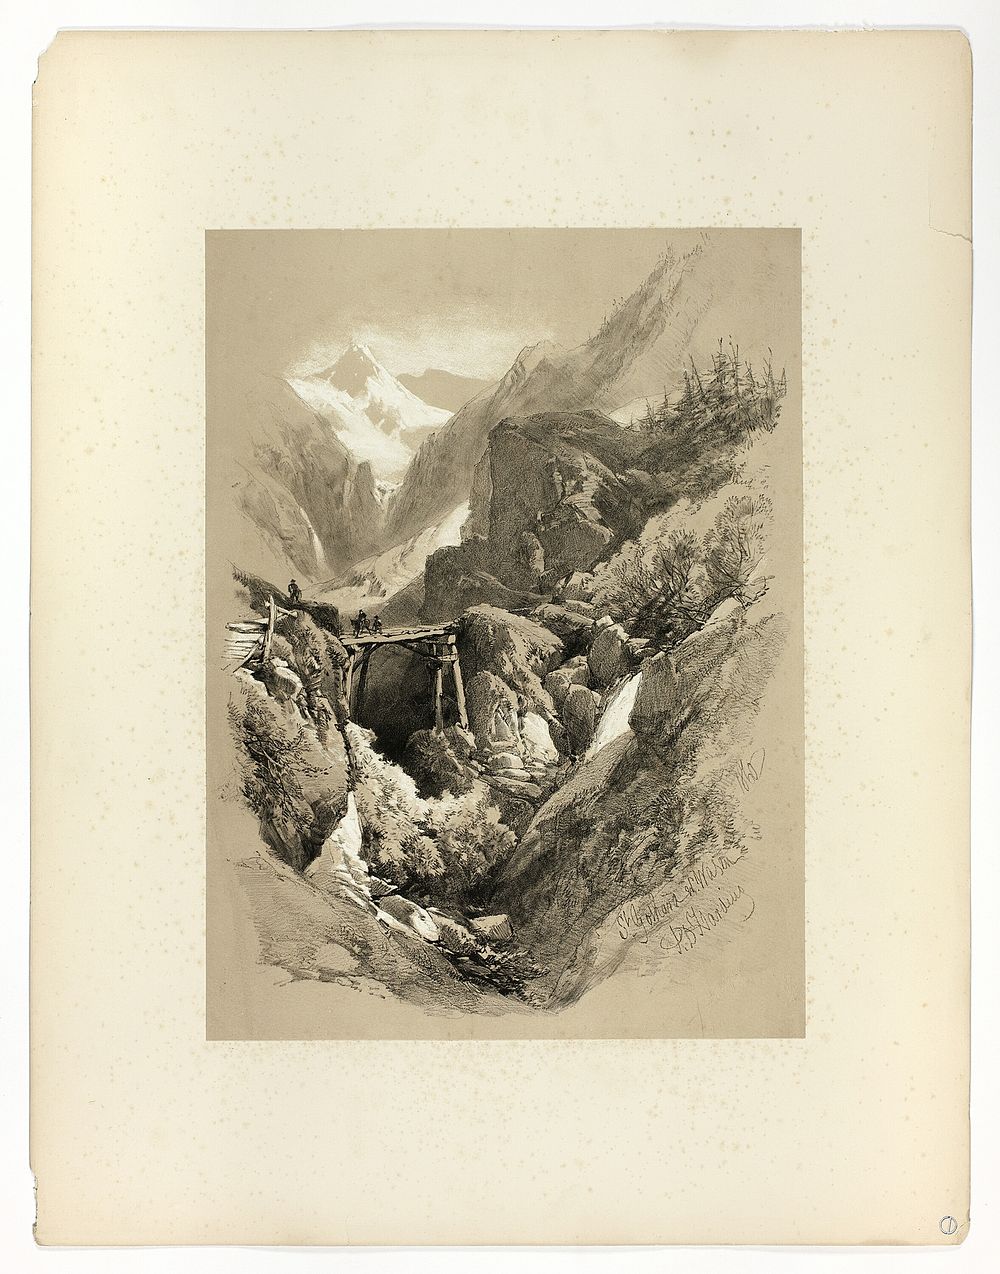 Saint Gothard, W. Wasen, from Picturesque Selections by James Duffield Harding